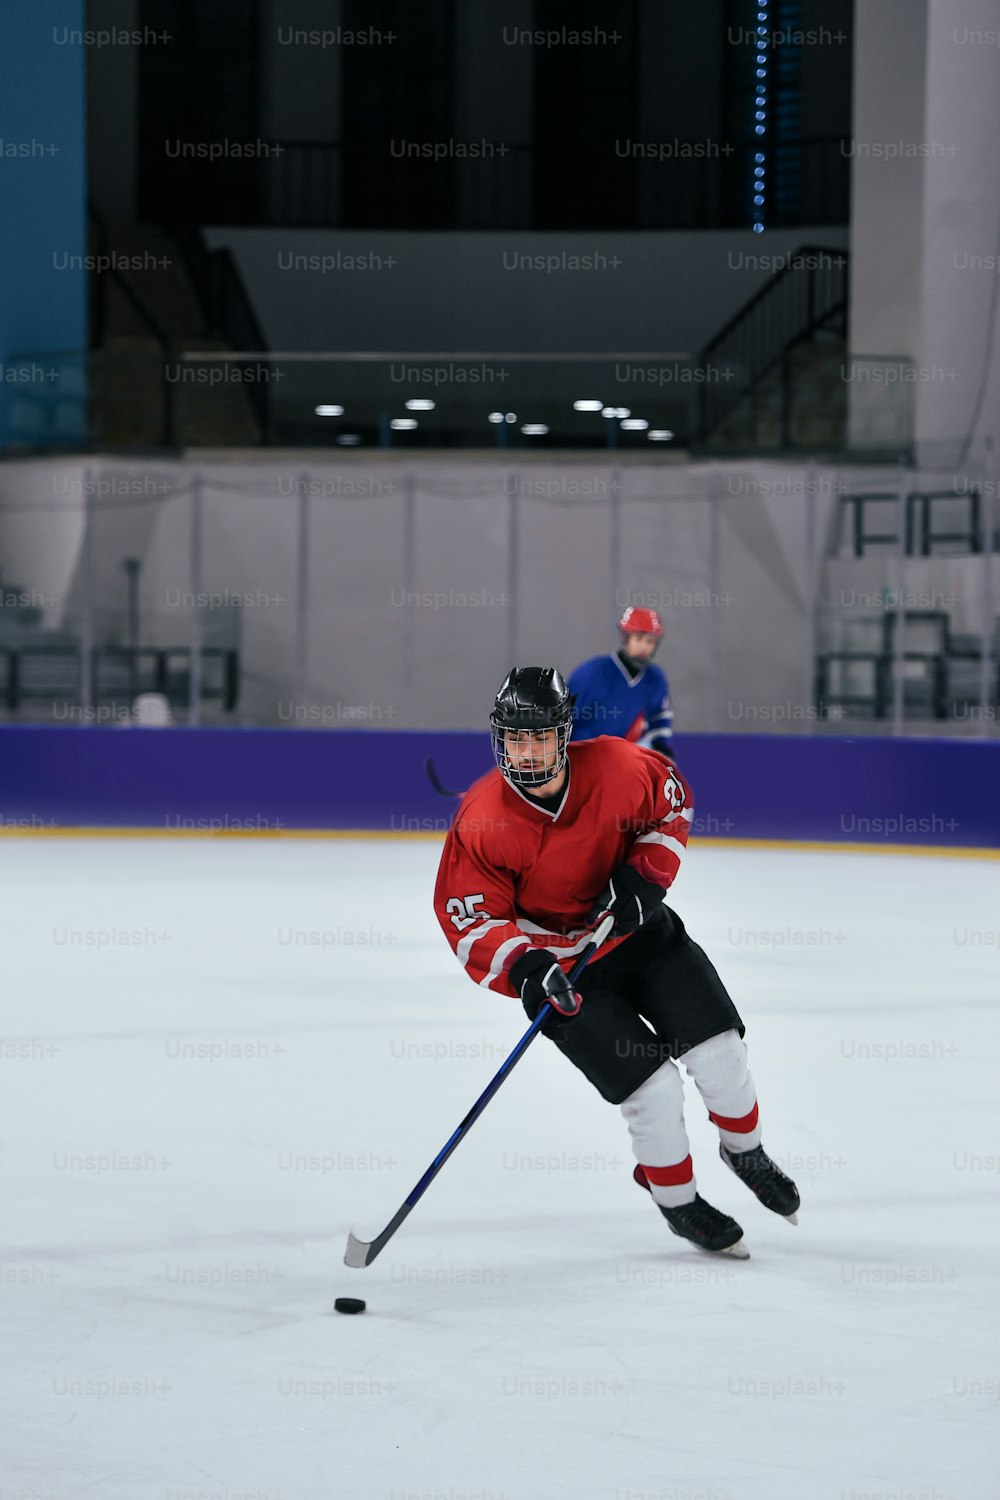 a man in a red jersey skating on an ice rink